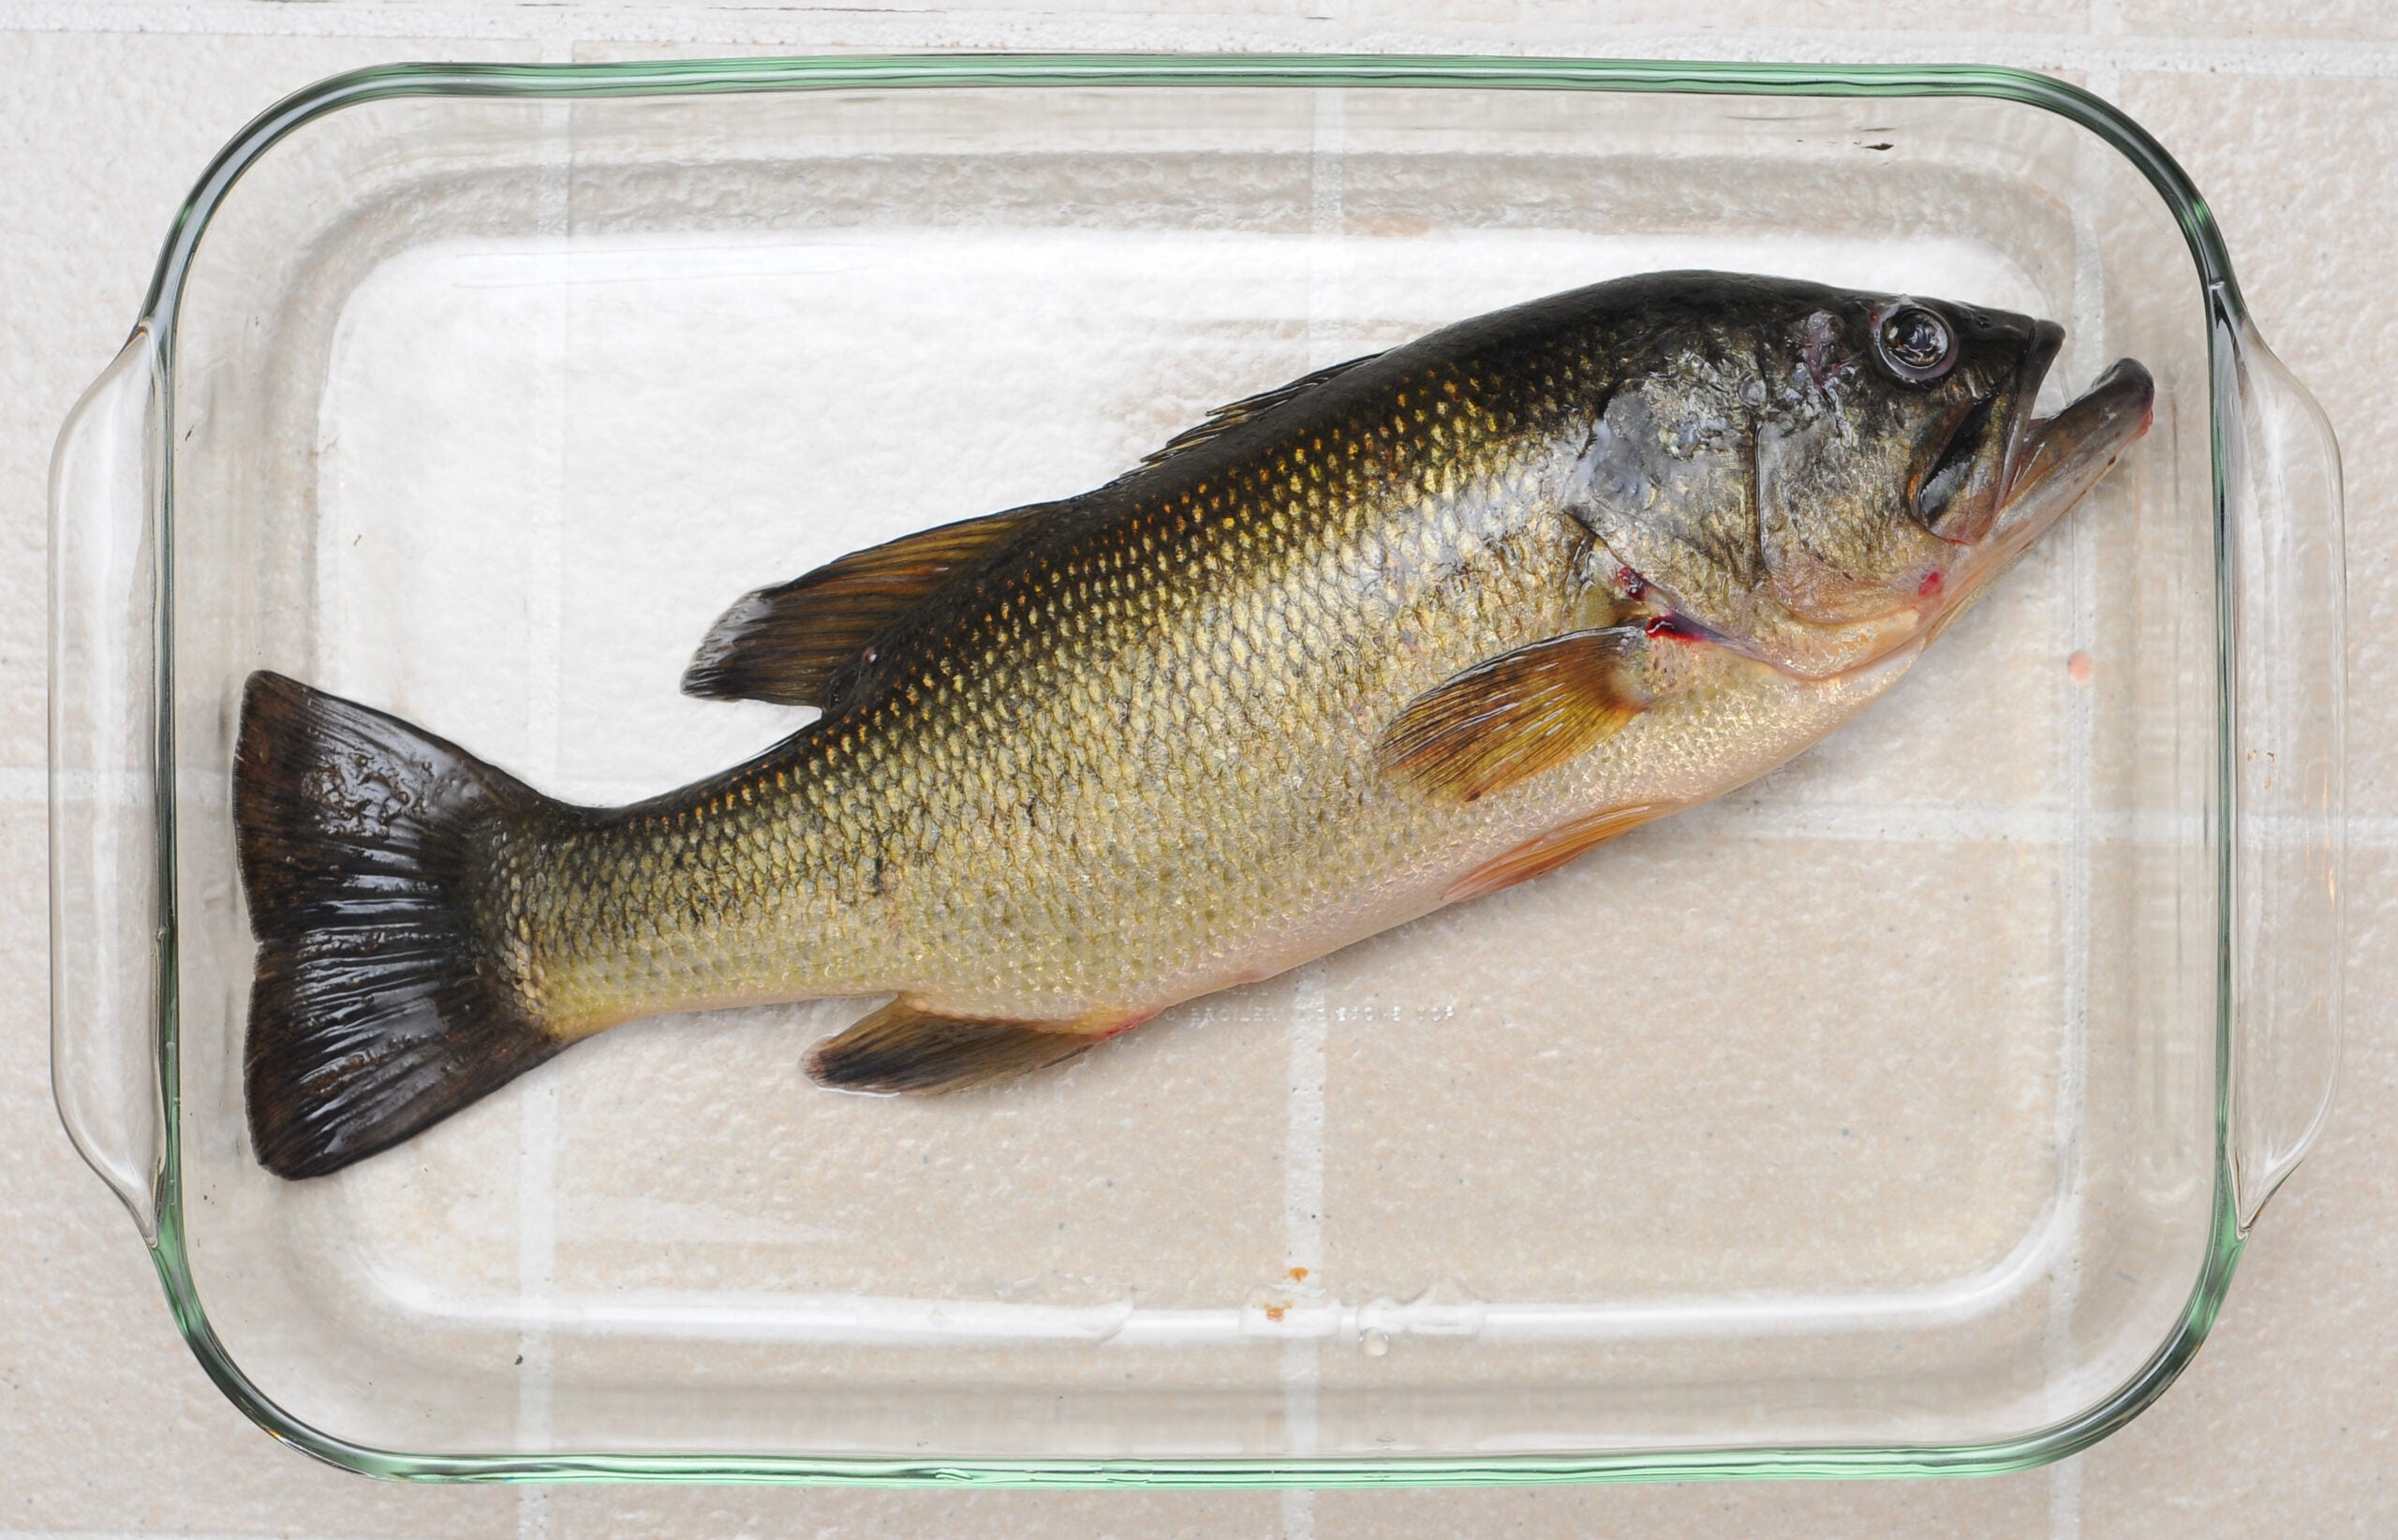 A largemouth bass in a glass baking dish, ready to be cooked